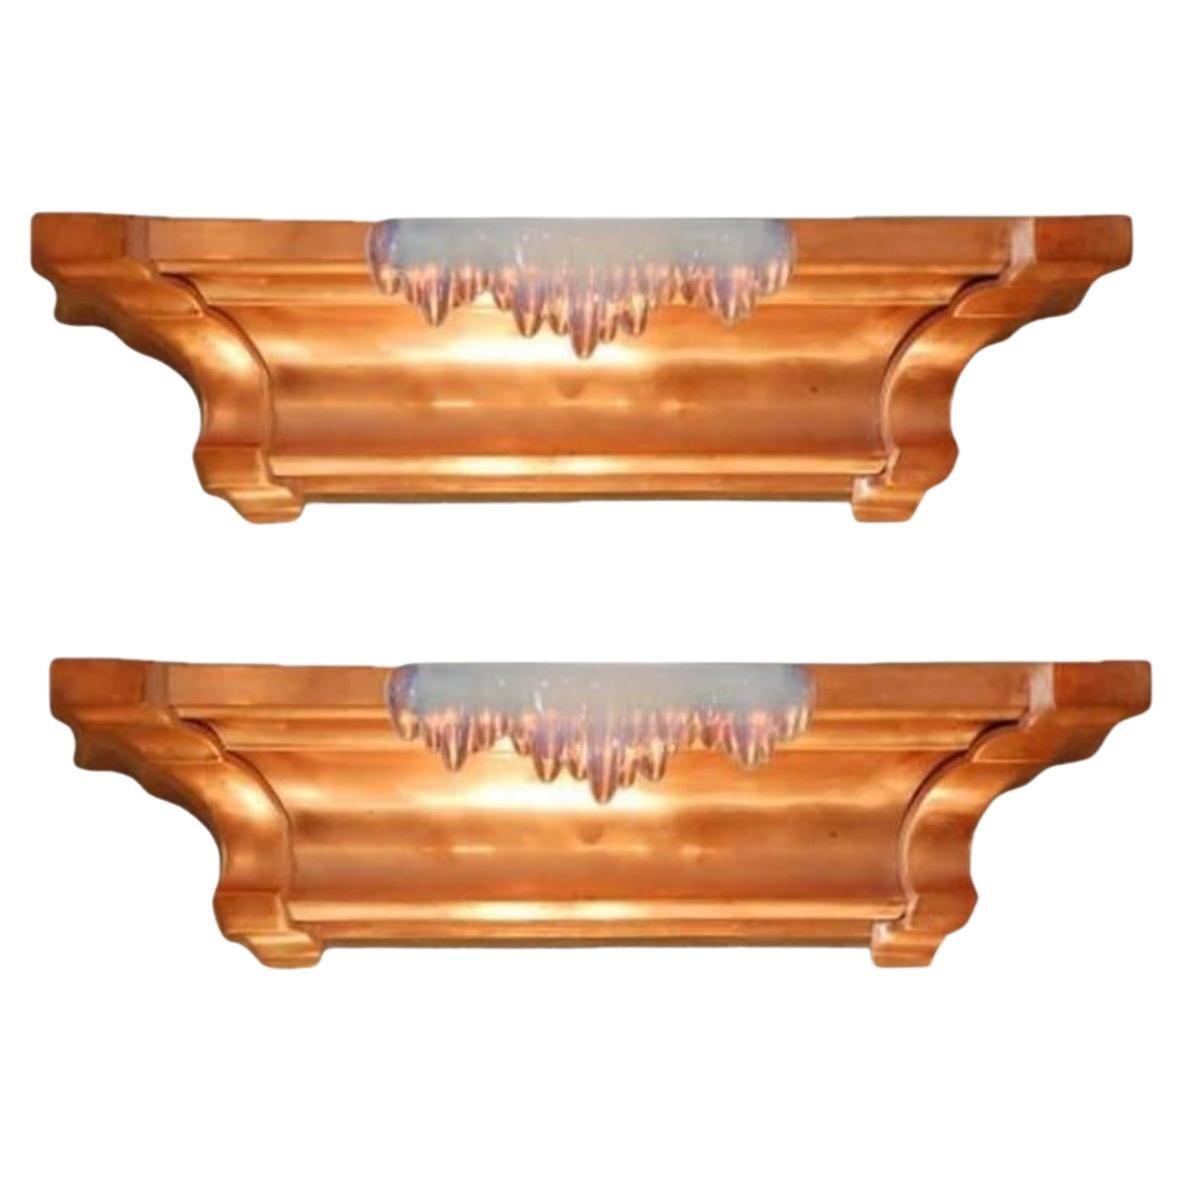 Pair of French Art Deco Copper and Opalescent Glass Icicle Sconces by Ezan For Sale